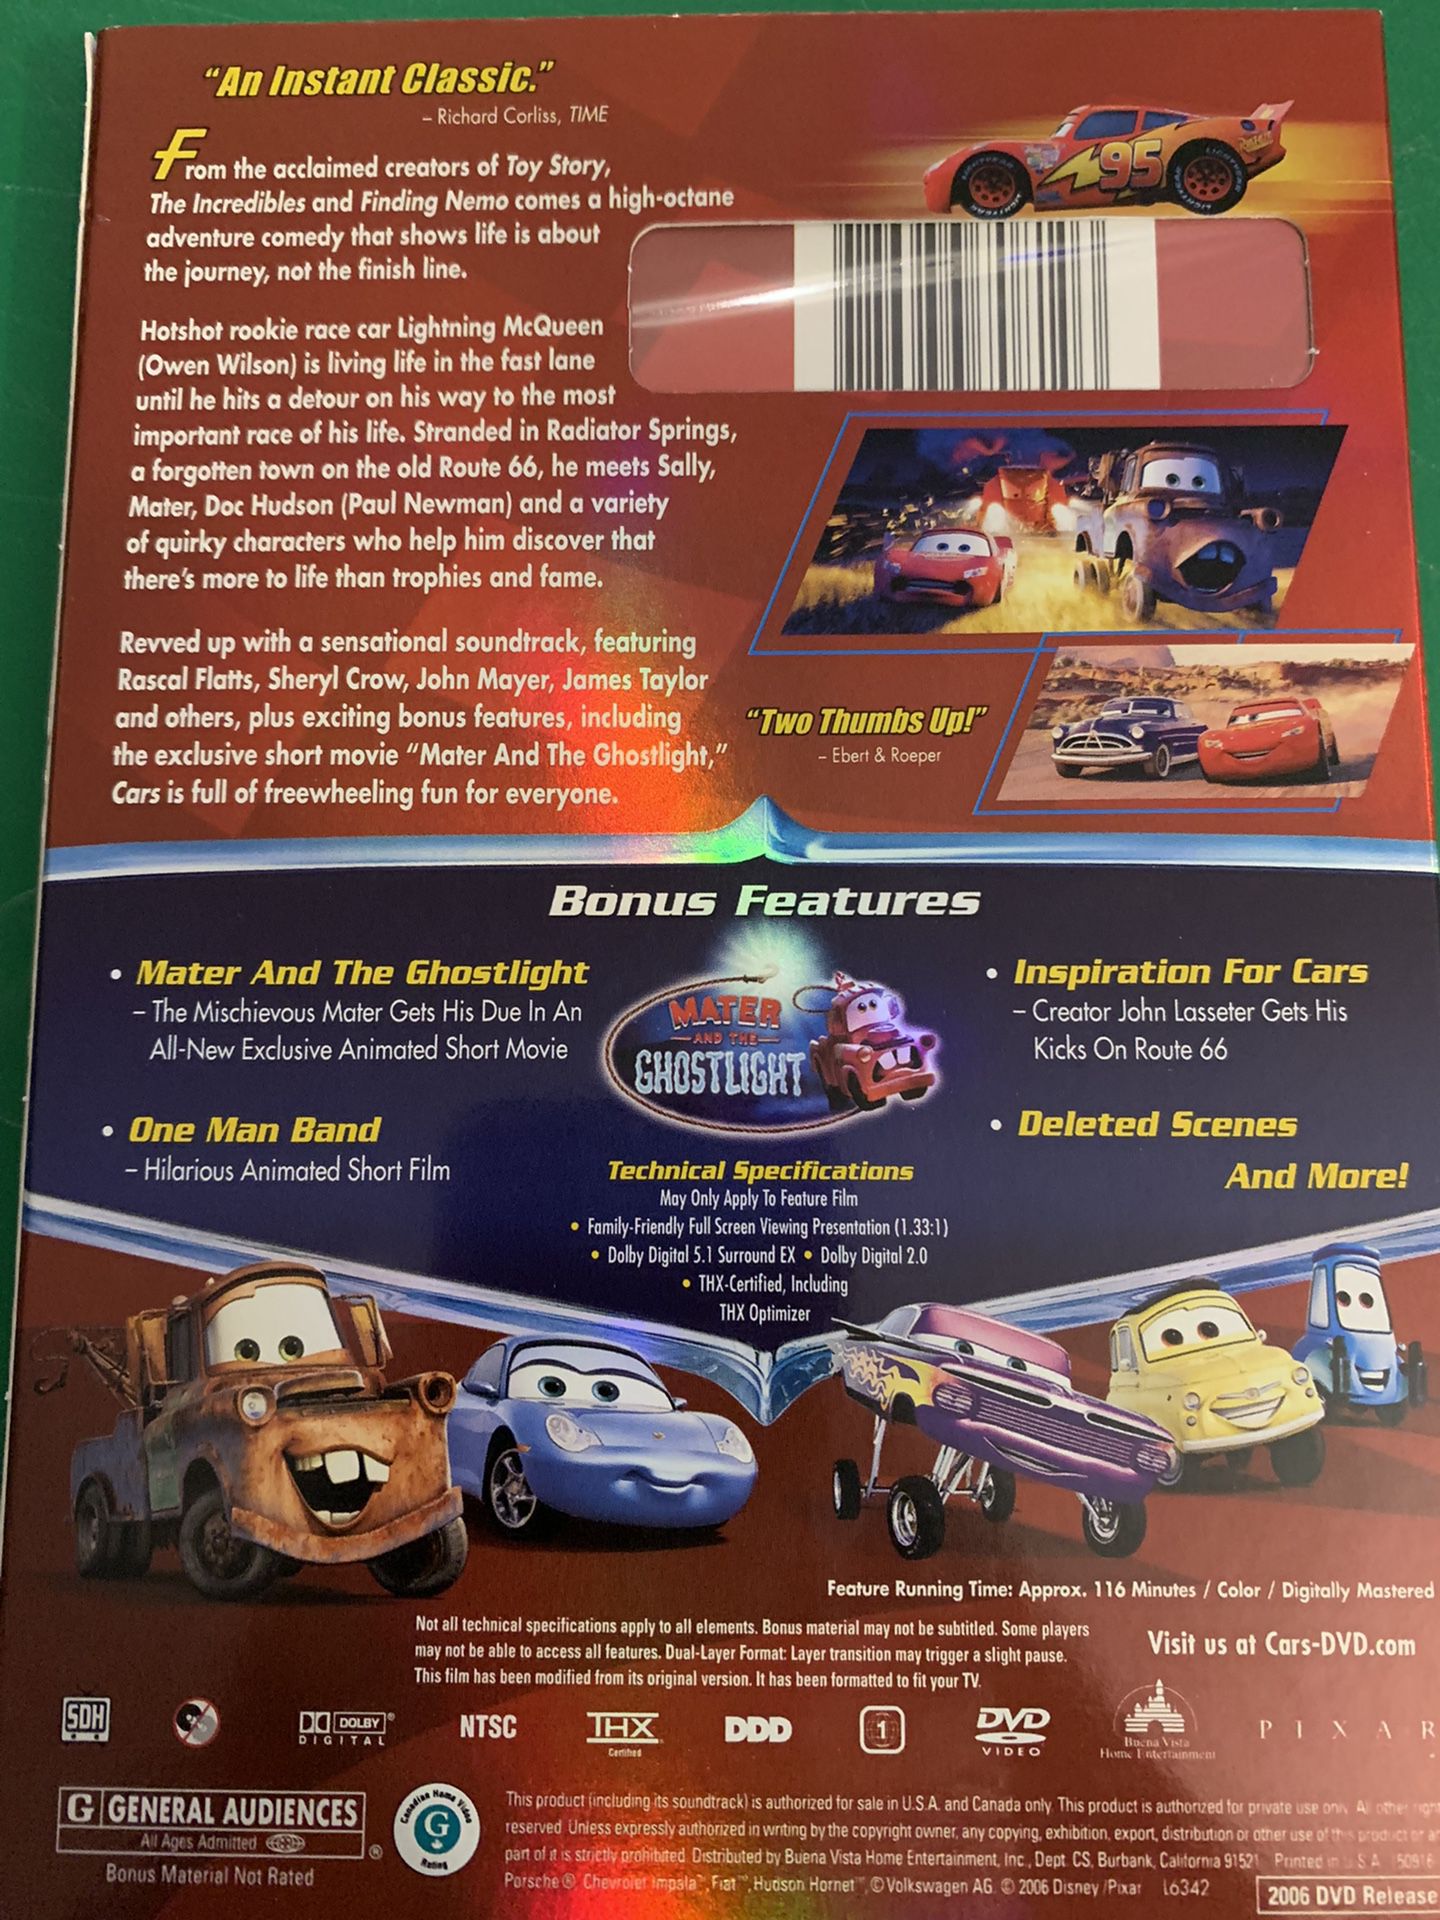 Disney's CARS Full Screen Edition (DVD) NEW! for Sale in Coppell